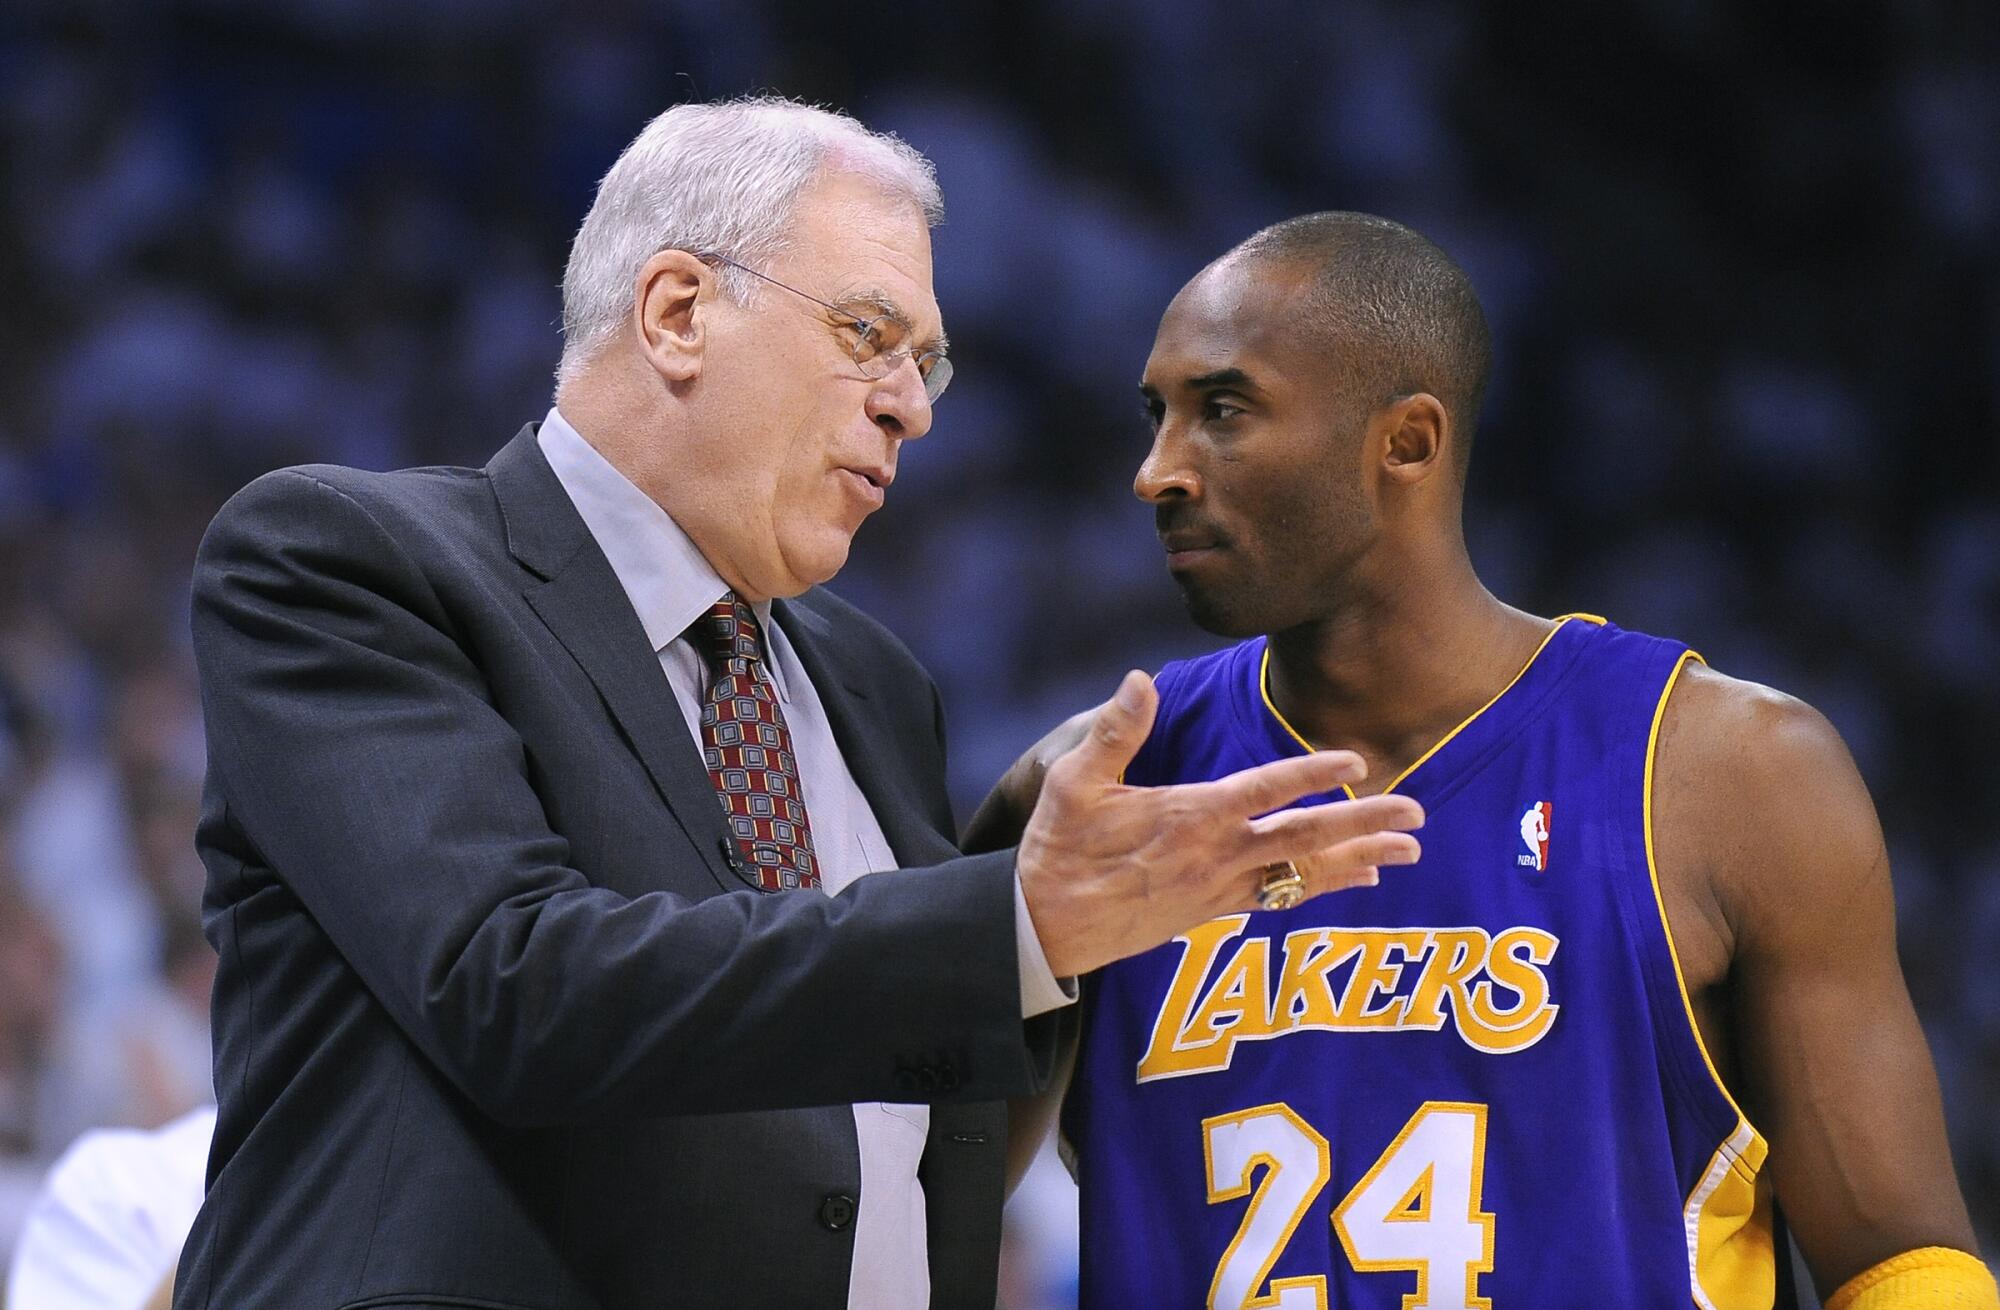 Lakers coach Phil Jackson has a few words with Kobe Bryant during a playoff game.